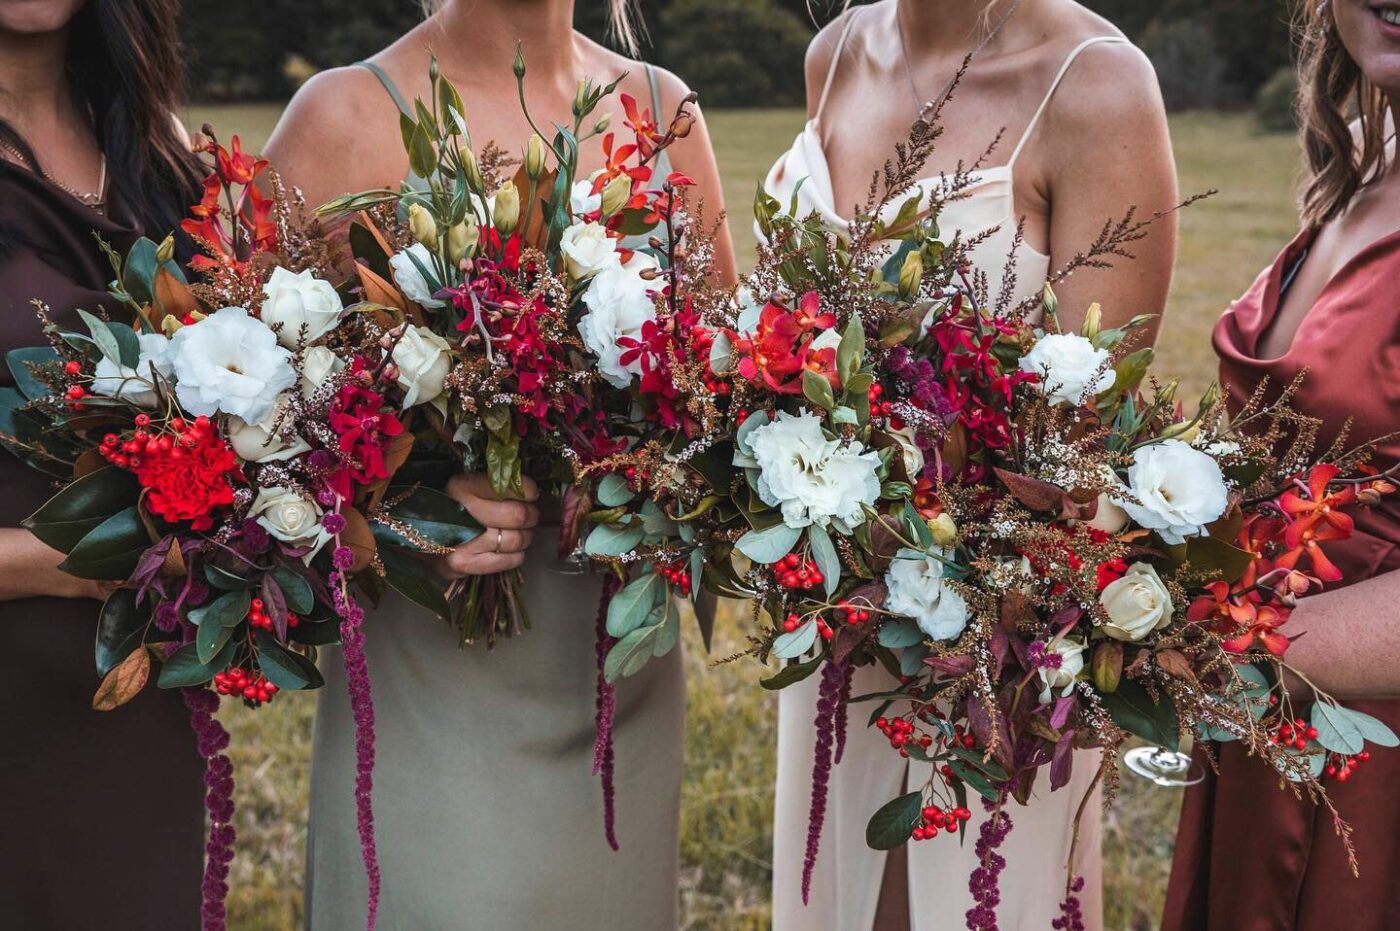 What to do with your wedding flowers at the end of the night